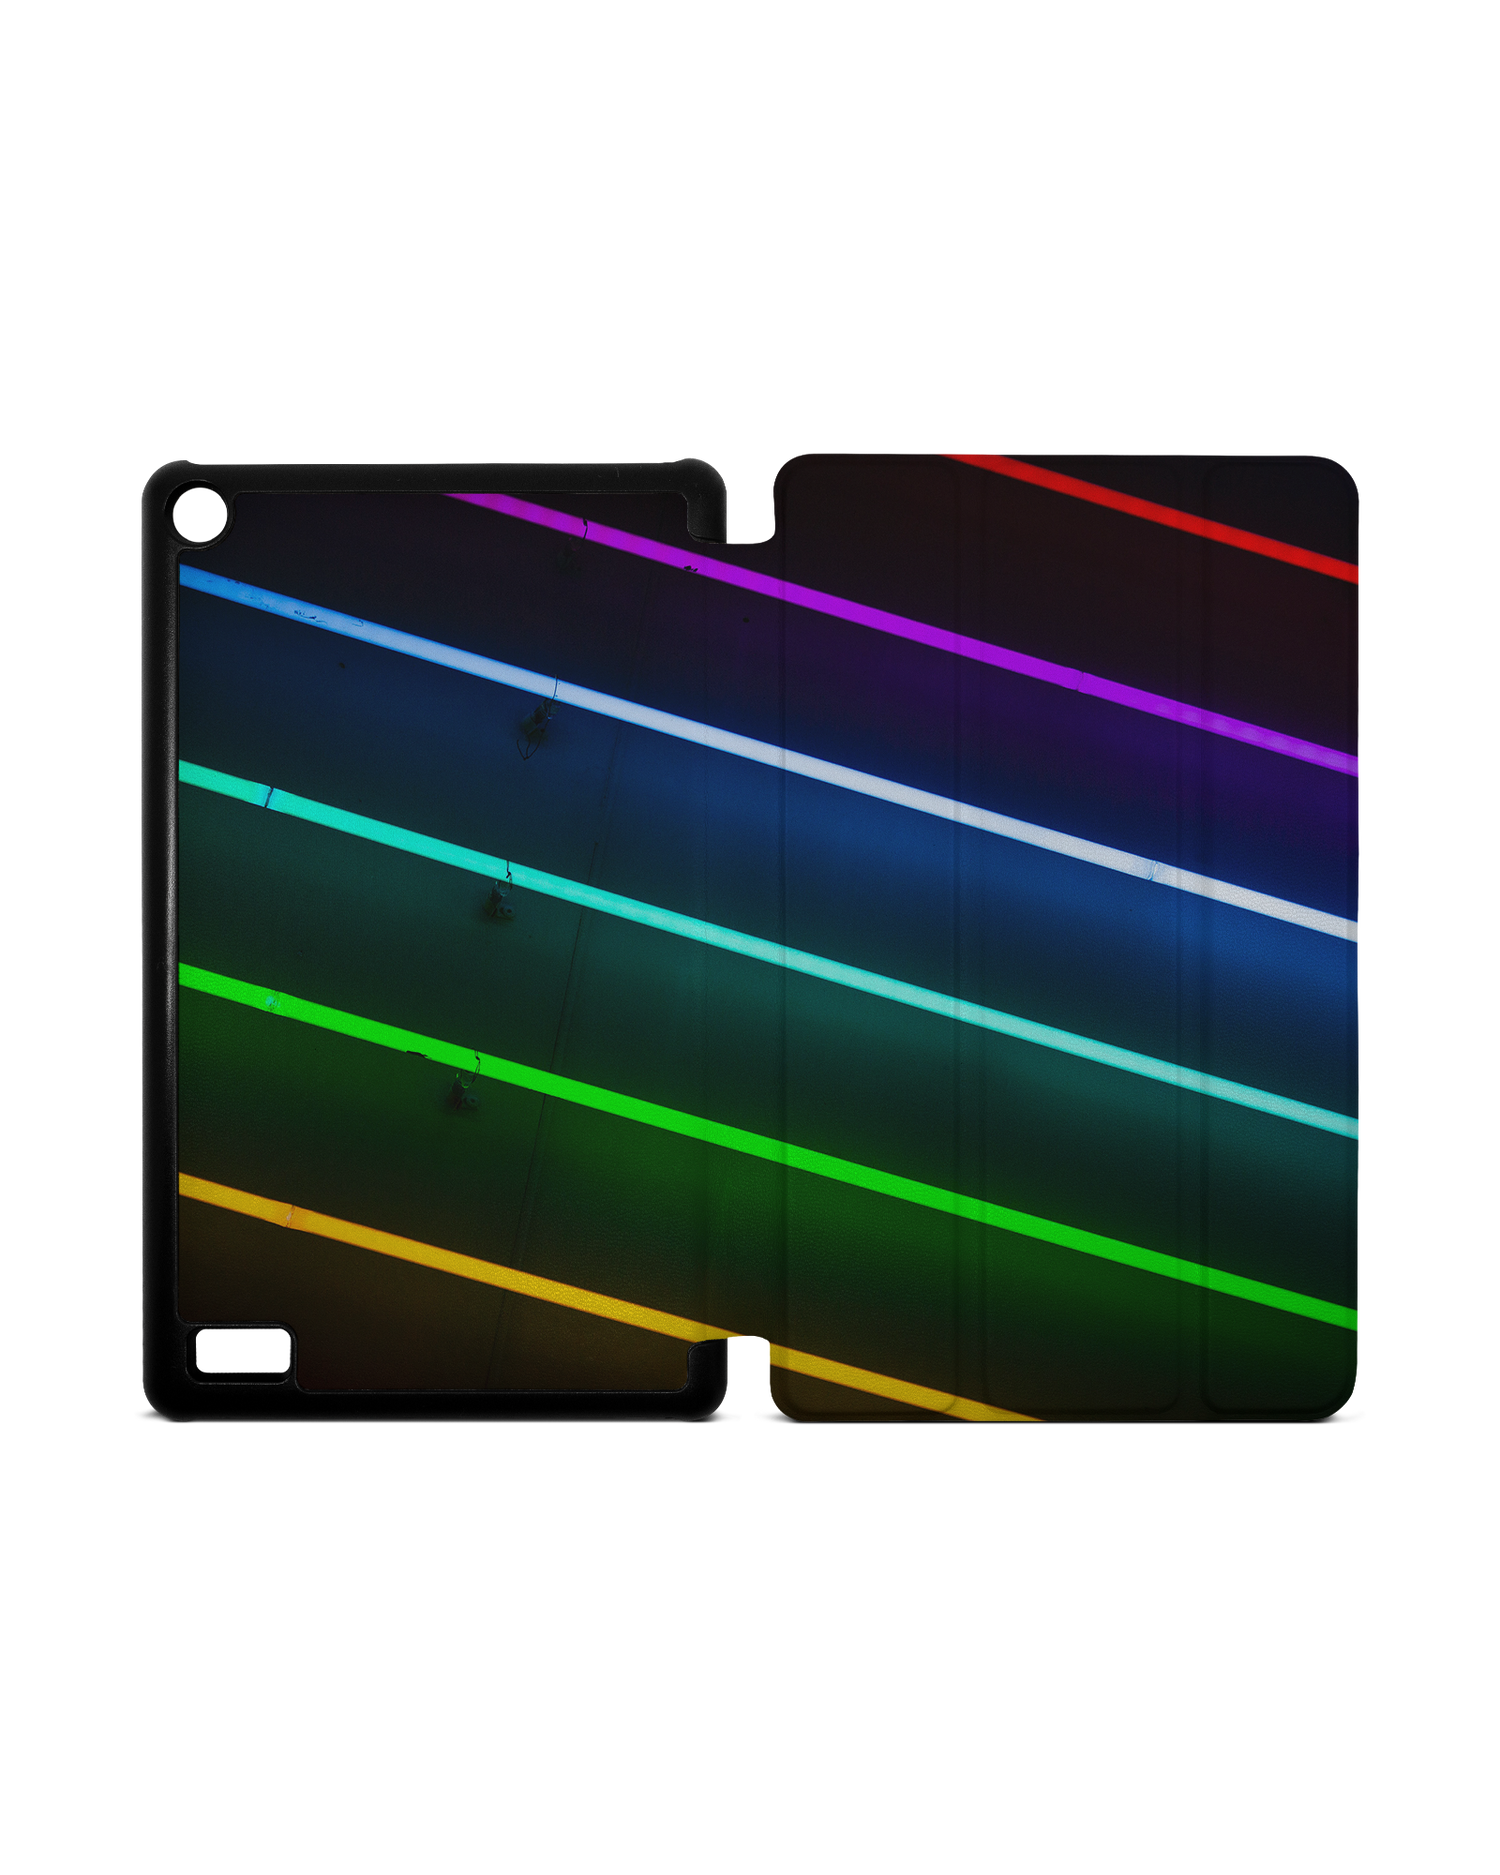 LGBTQ Tablet Smart Case for Amazon Fire 7: Opened